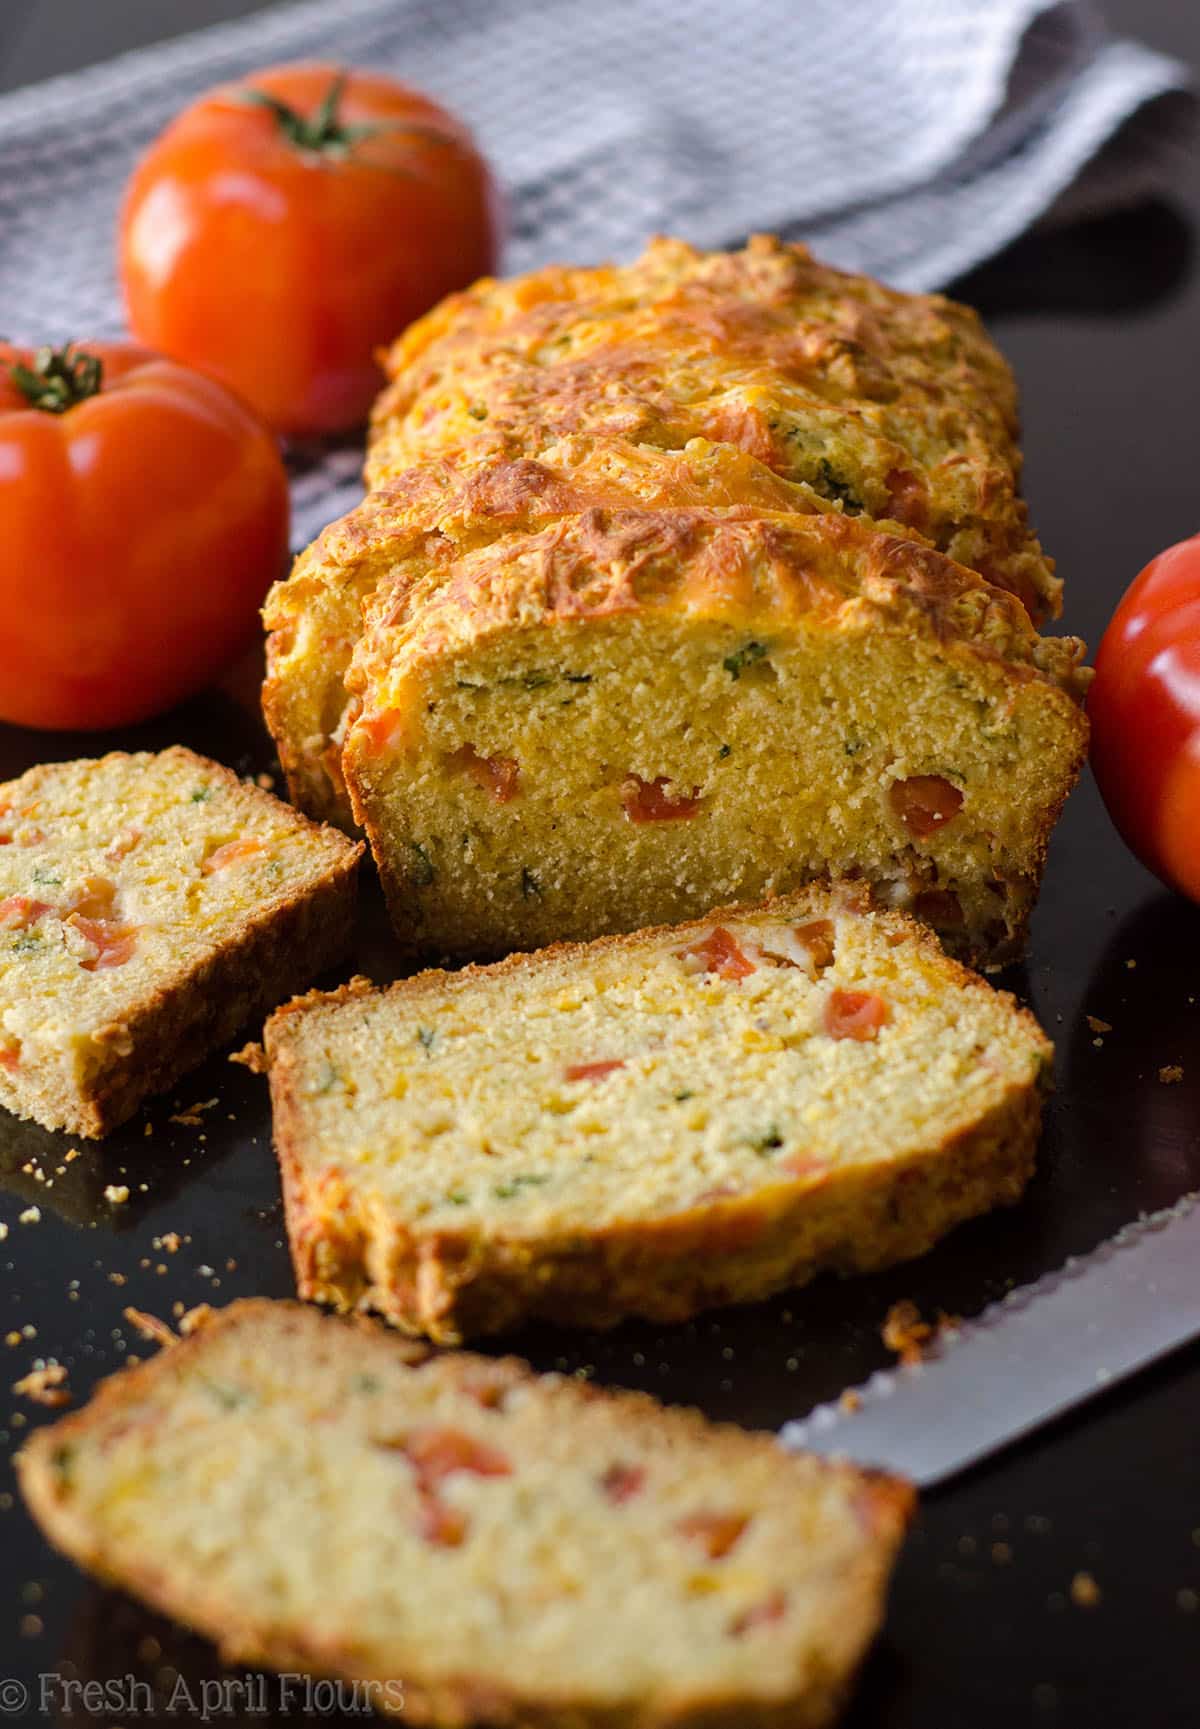 Herbed Tomato Quick Bread: A savory bread that comes together quickly using fresh tomatoes and basil. Perfect for using summer produce!